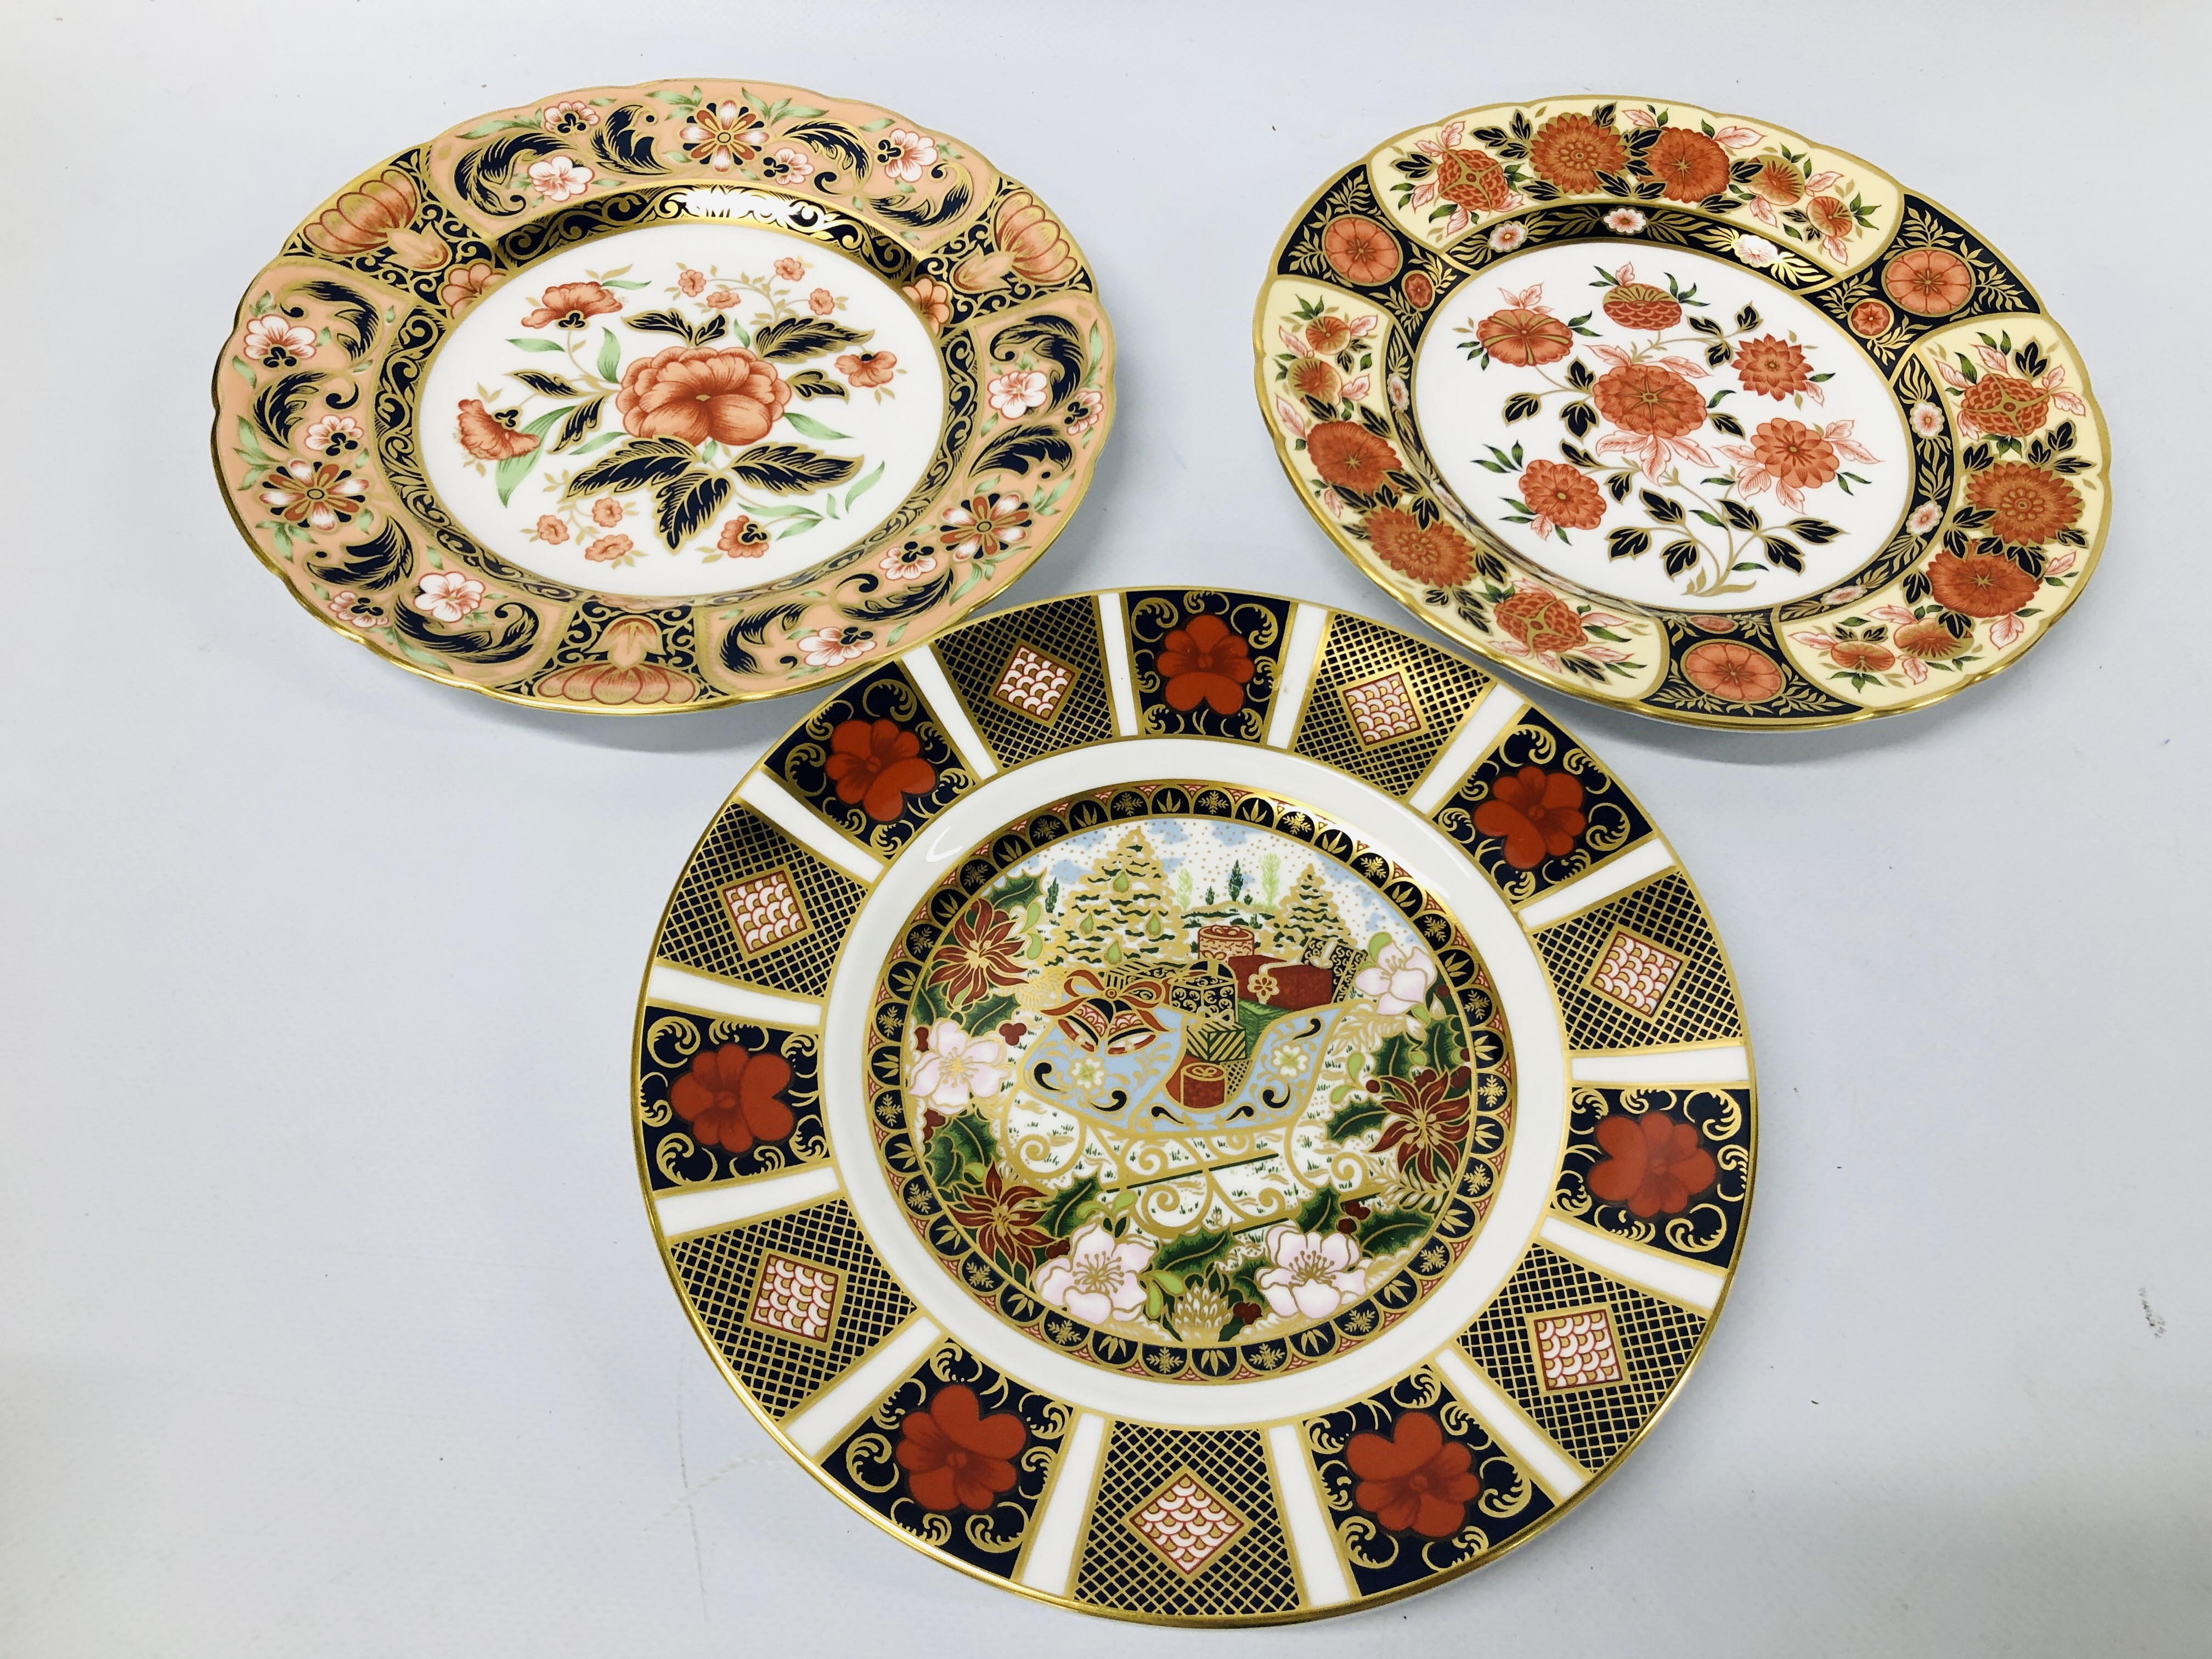 COLLECTION OF SIX ROYAL CROWN DERBY PLATES TO INCLUDE TWO IMARI, CHRYSANTHEMUM GOLDEN PEONY, - Image 4 of 6